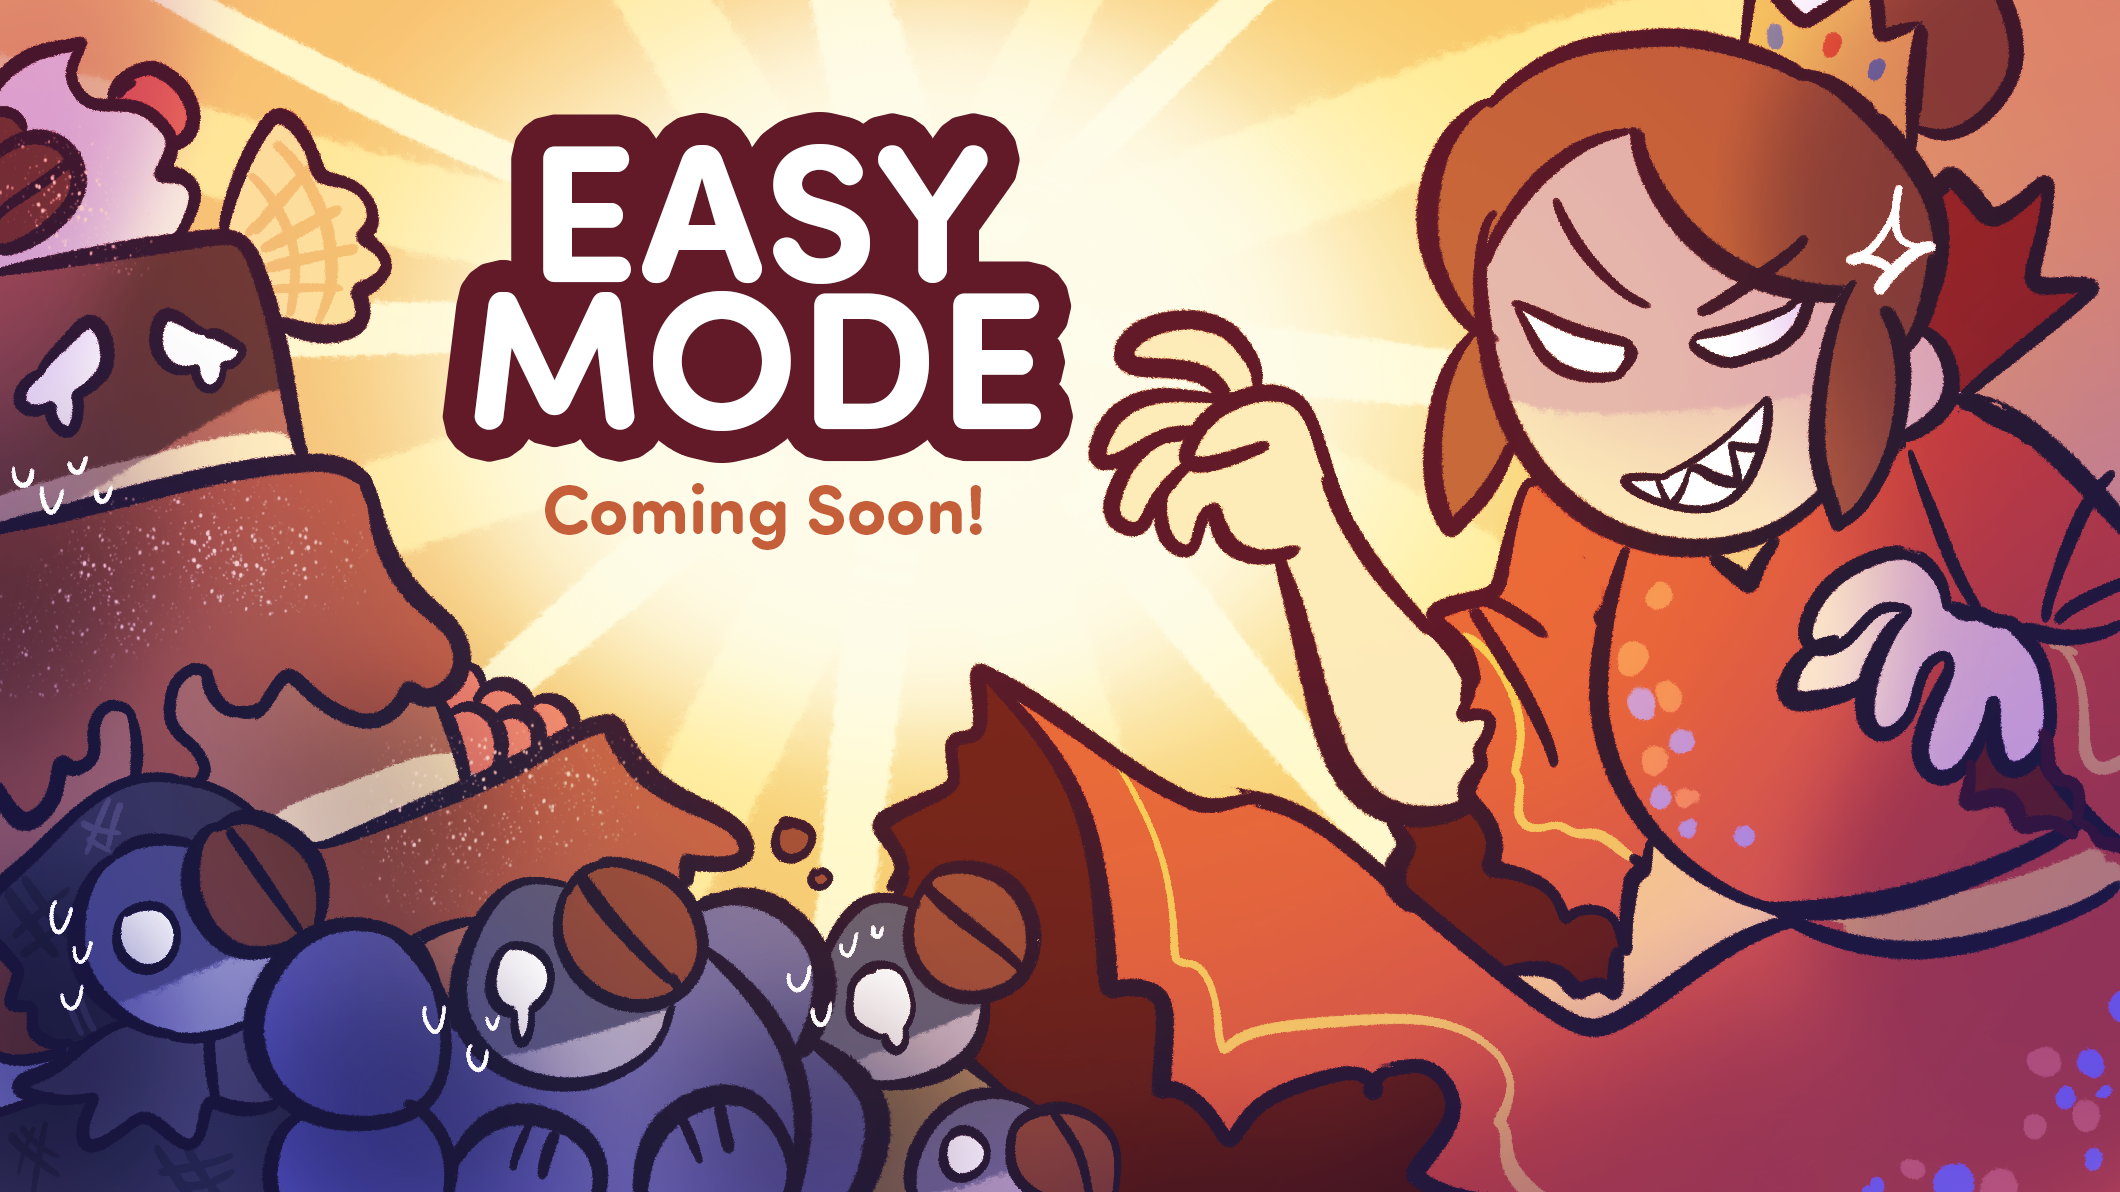 Easy Mode Coming Soon!